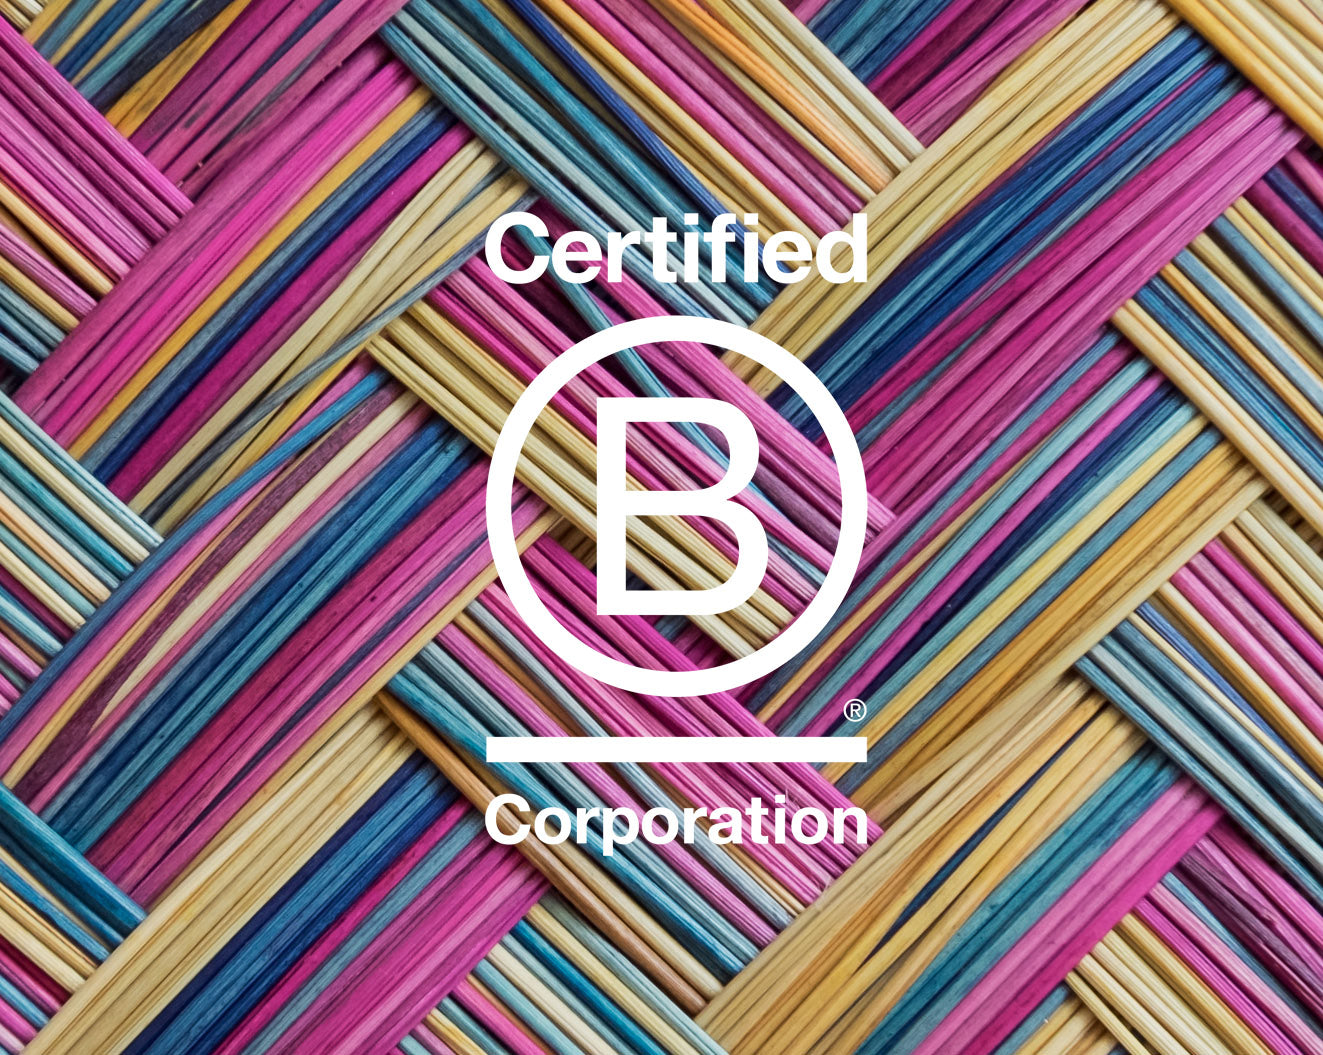 Accompany is proud to be a Certified B Corporation